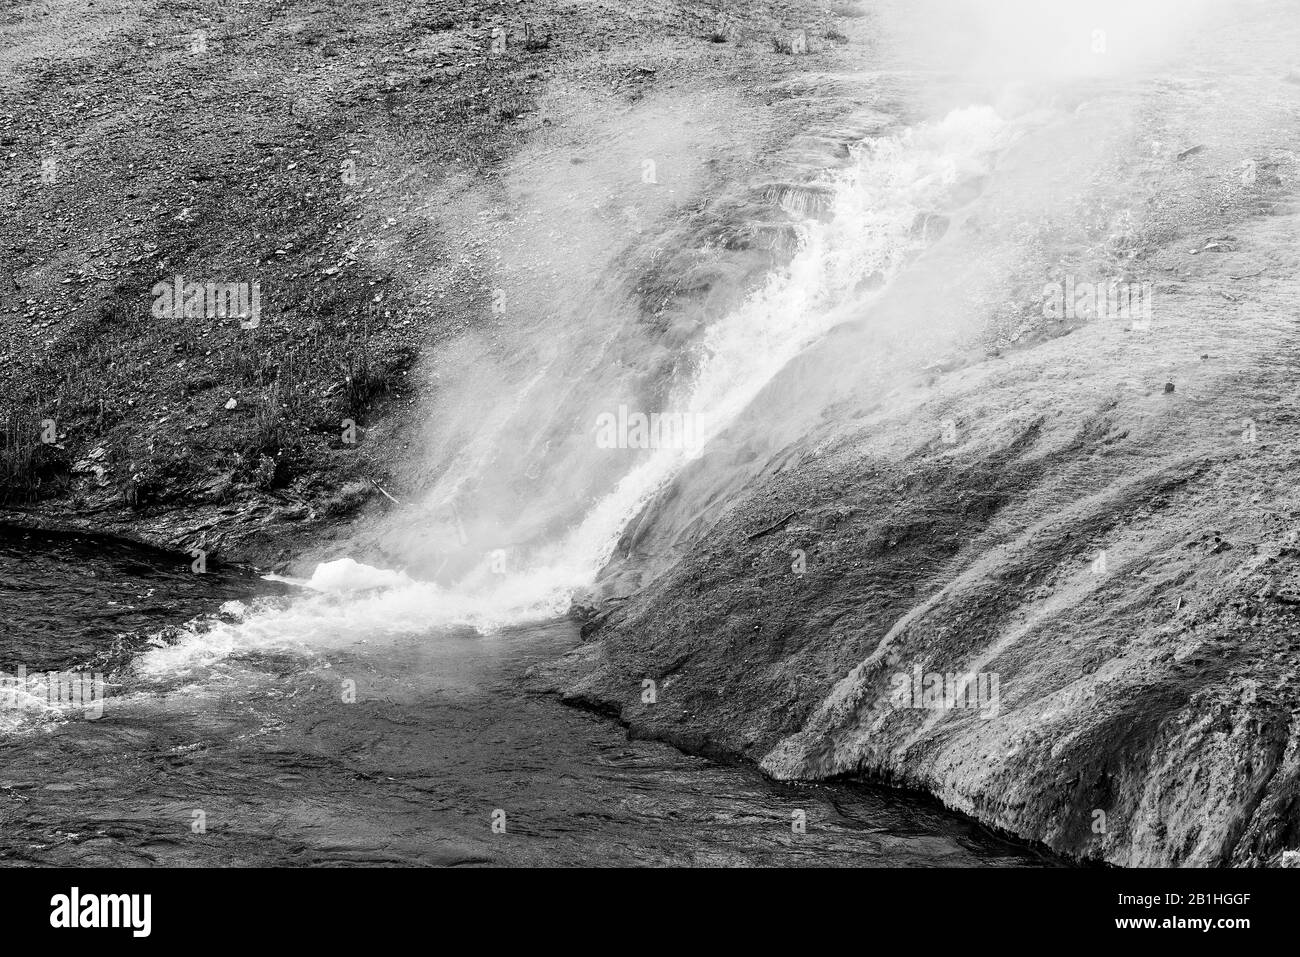 A stream of boiling steamy water running down hillside into river. Stock Photo